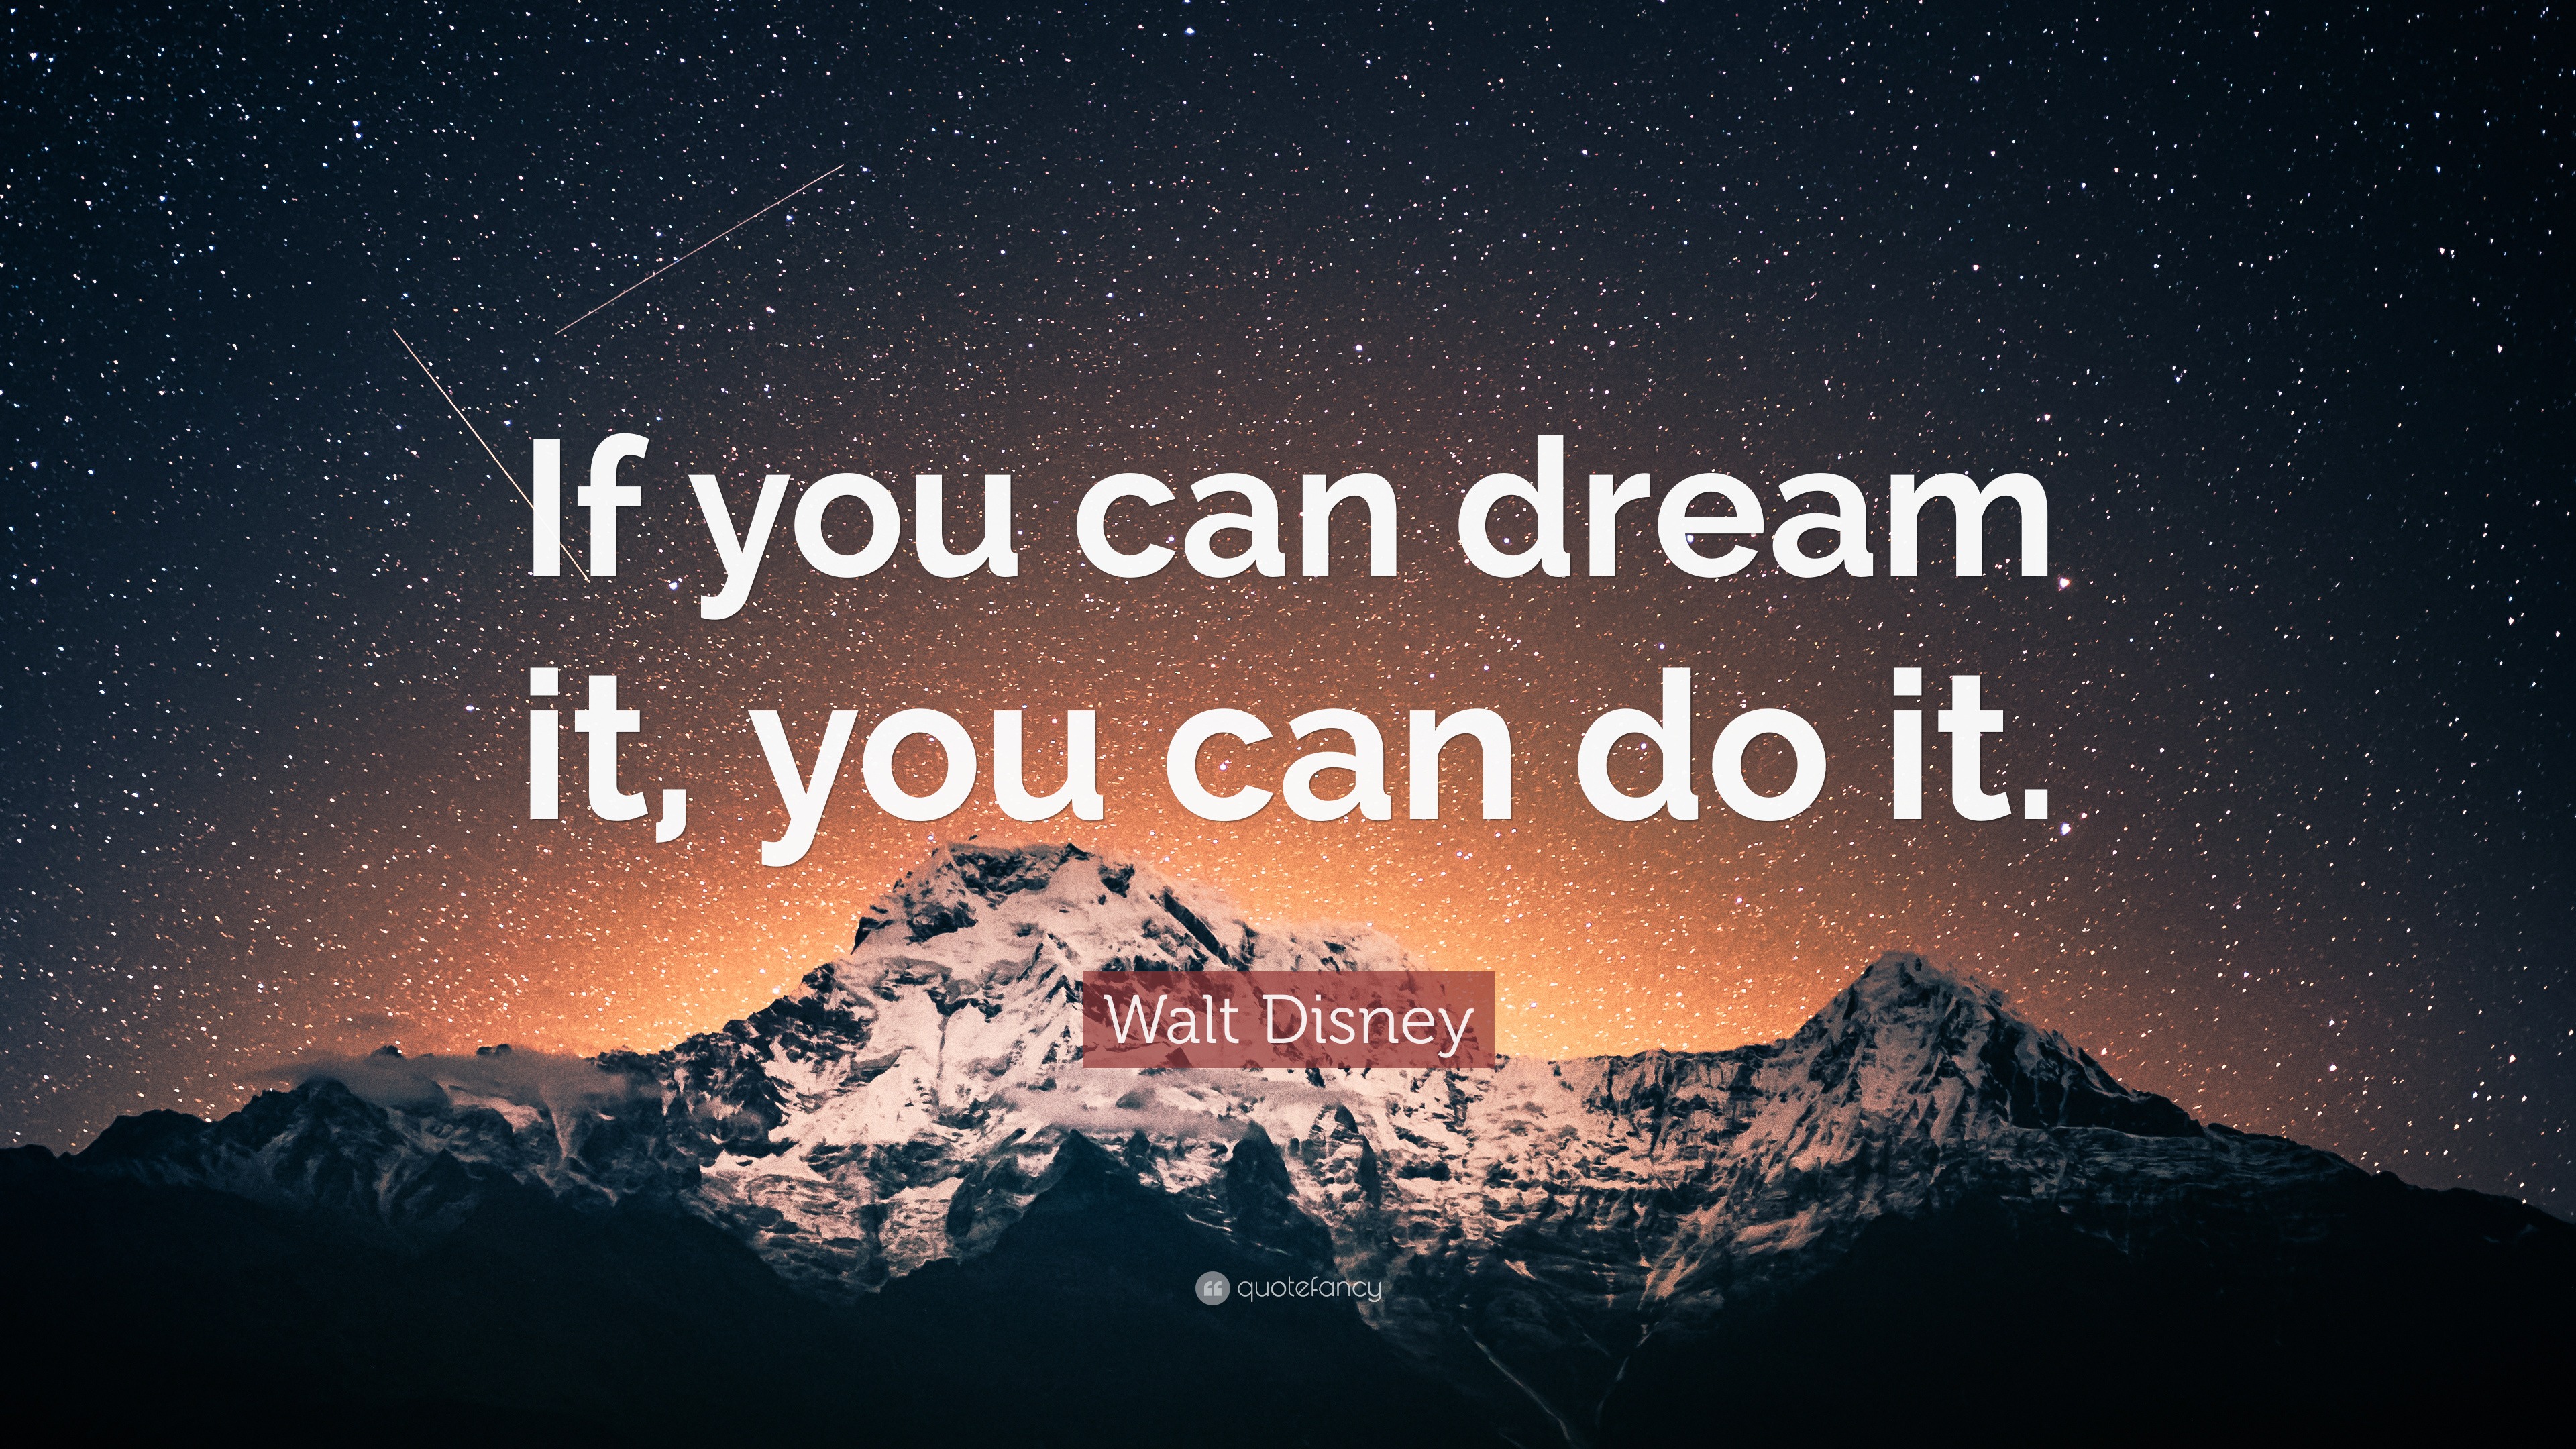 Walt Disney Quote “If you can dream it, you can do it